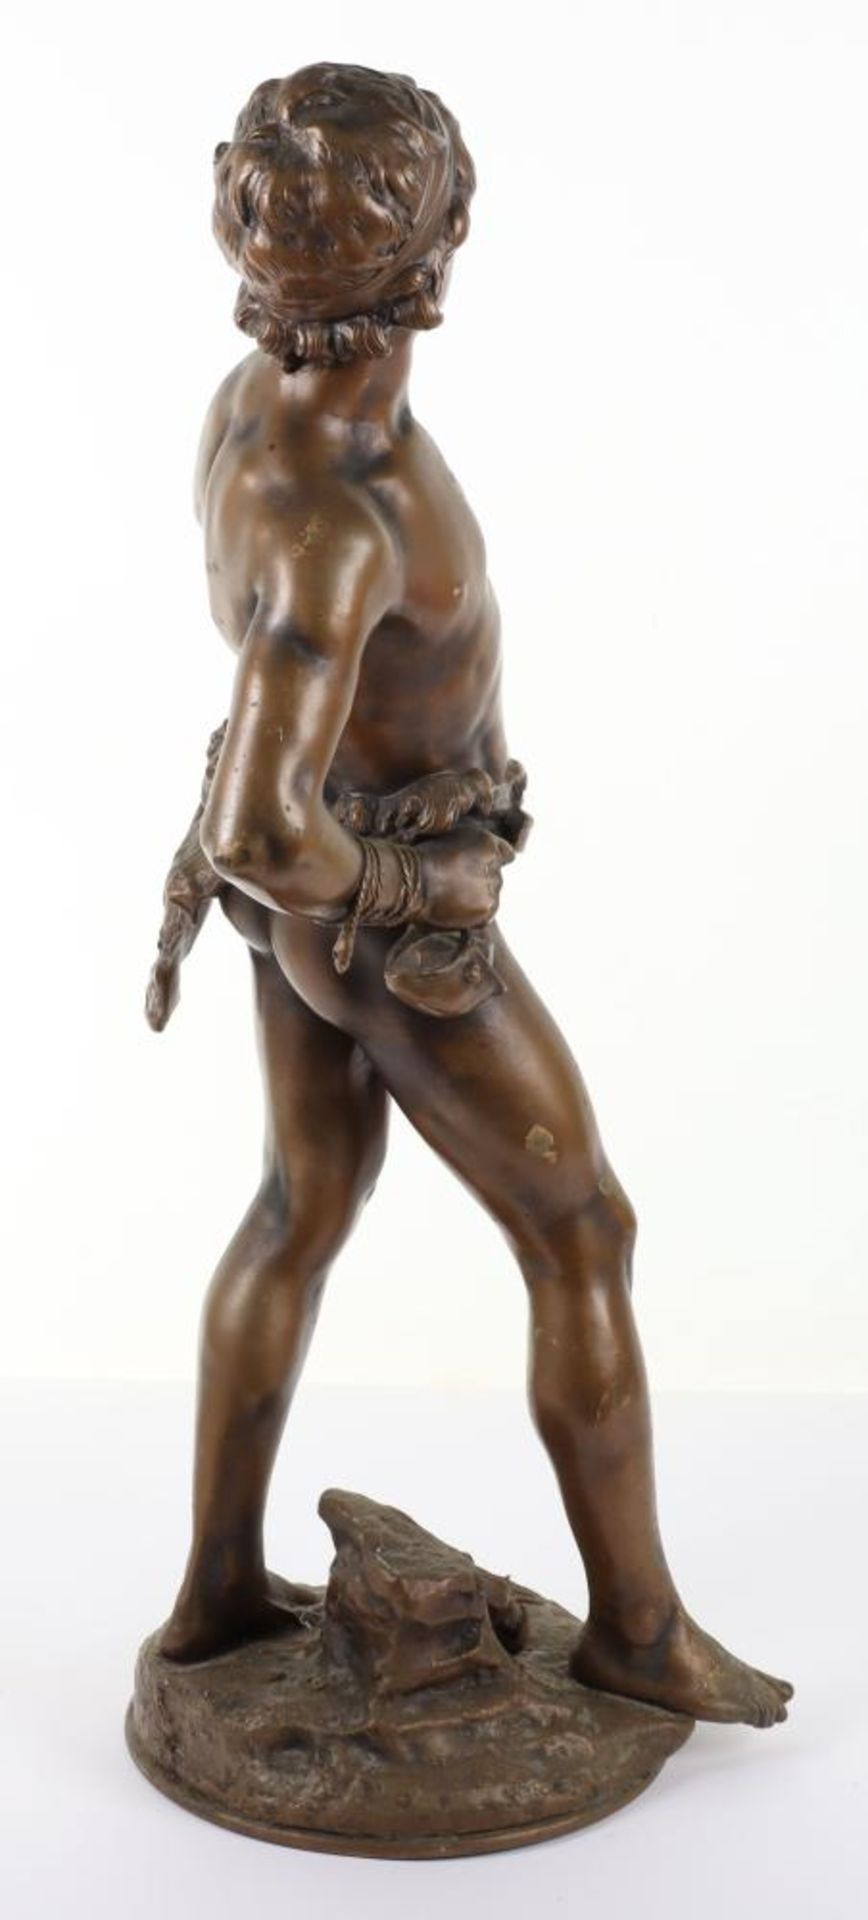 Louis Auguste Moreau (1855-1919), bronze of David on naturalistic base, 19th century - Image 3 of 5